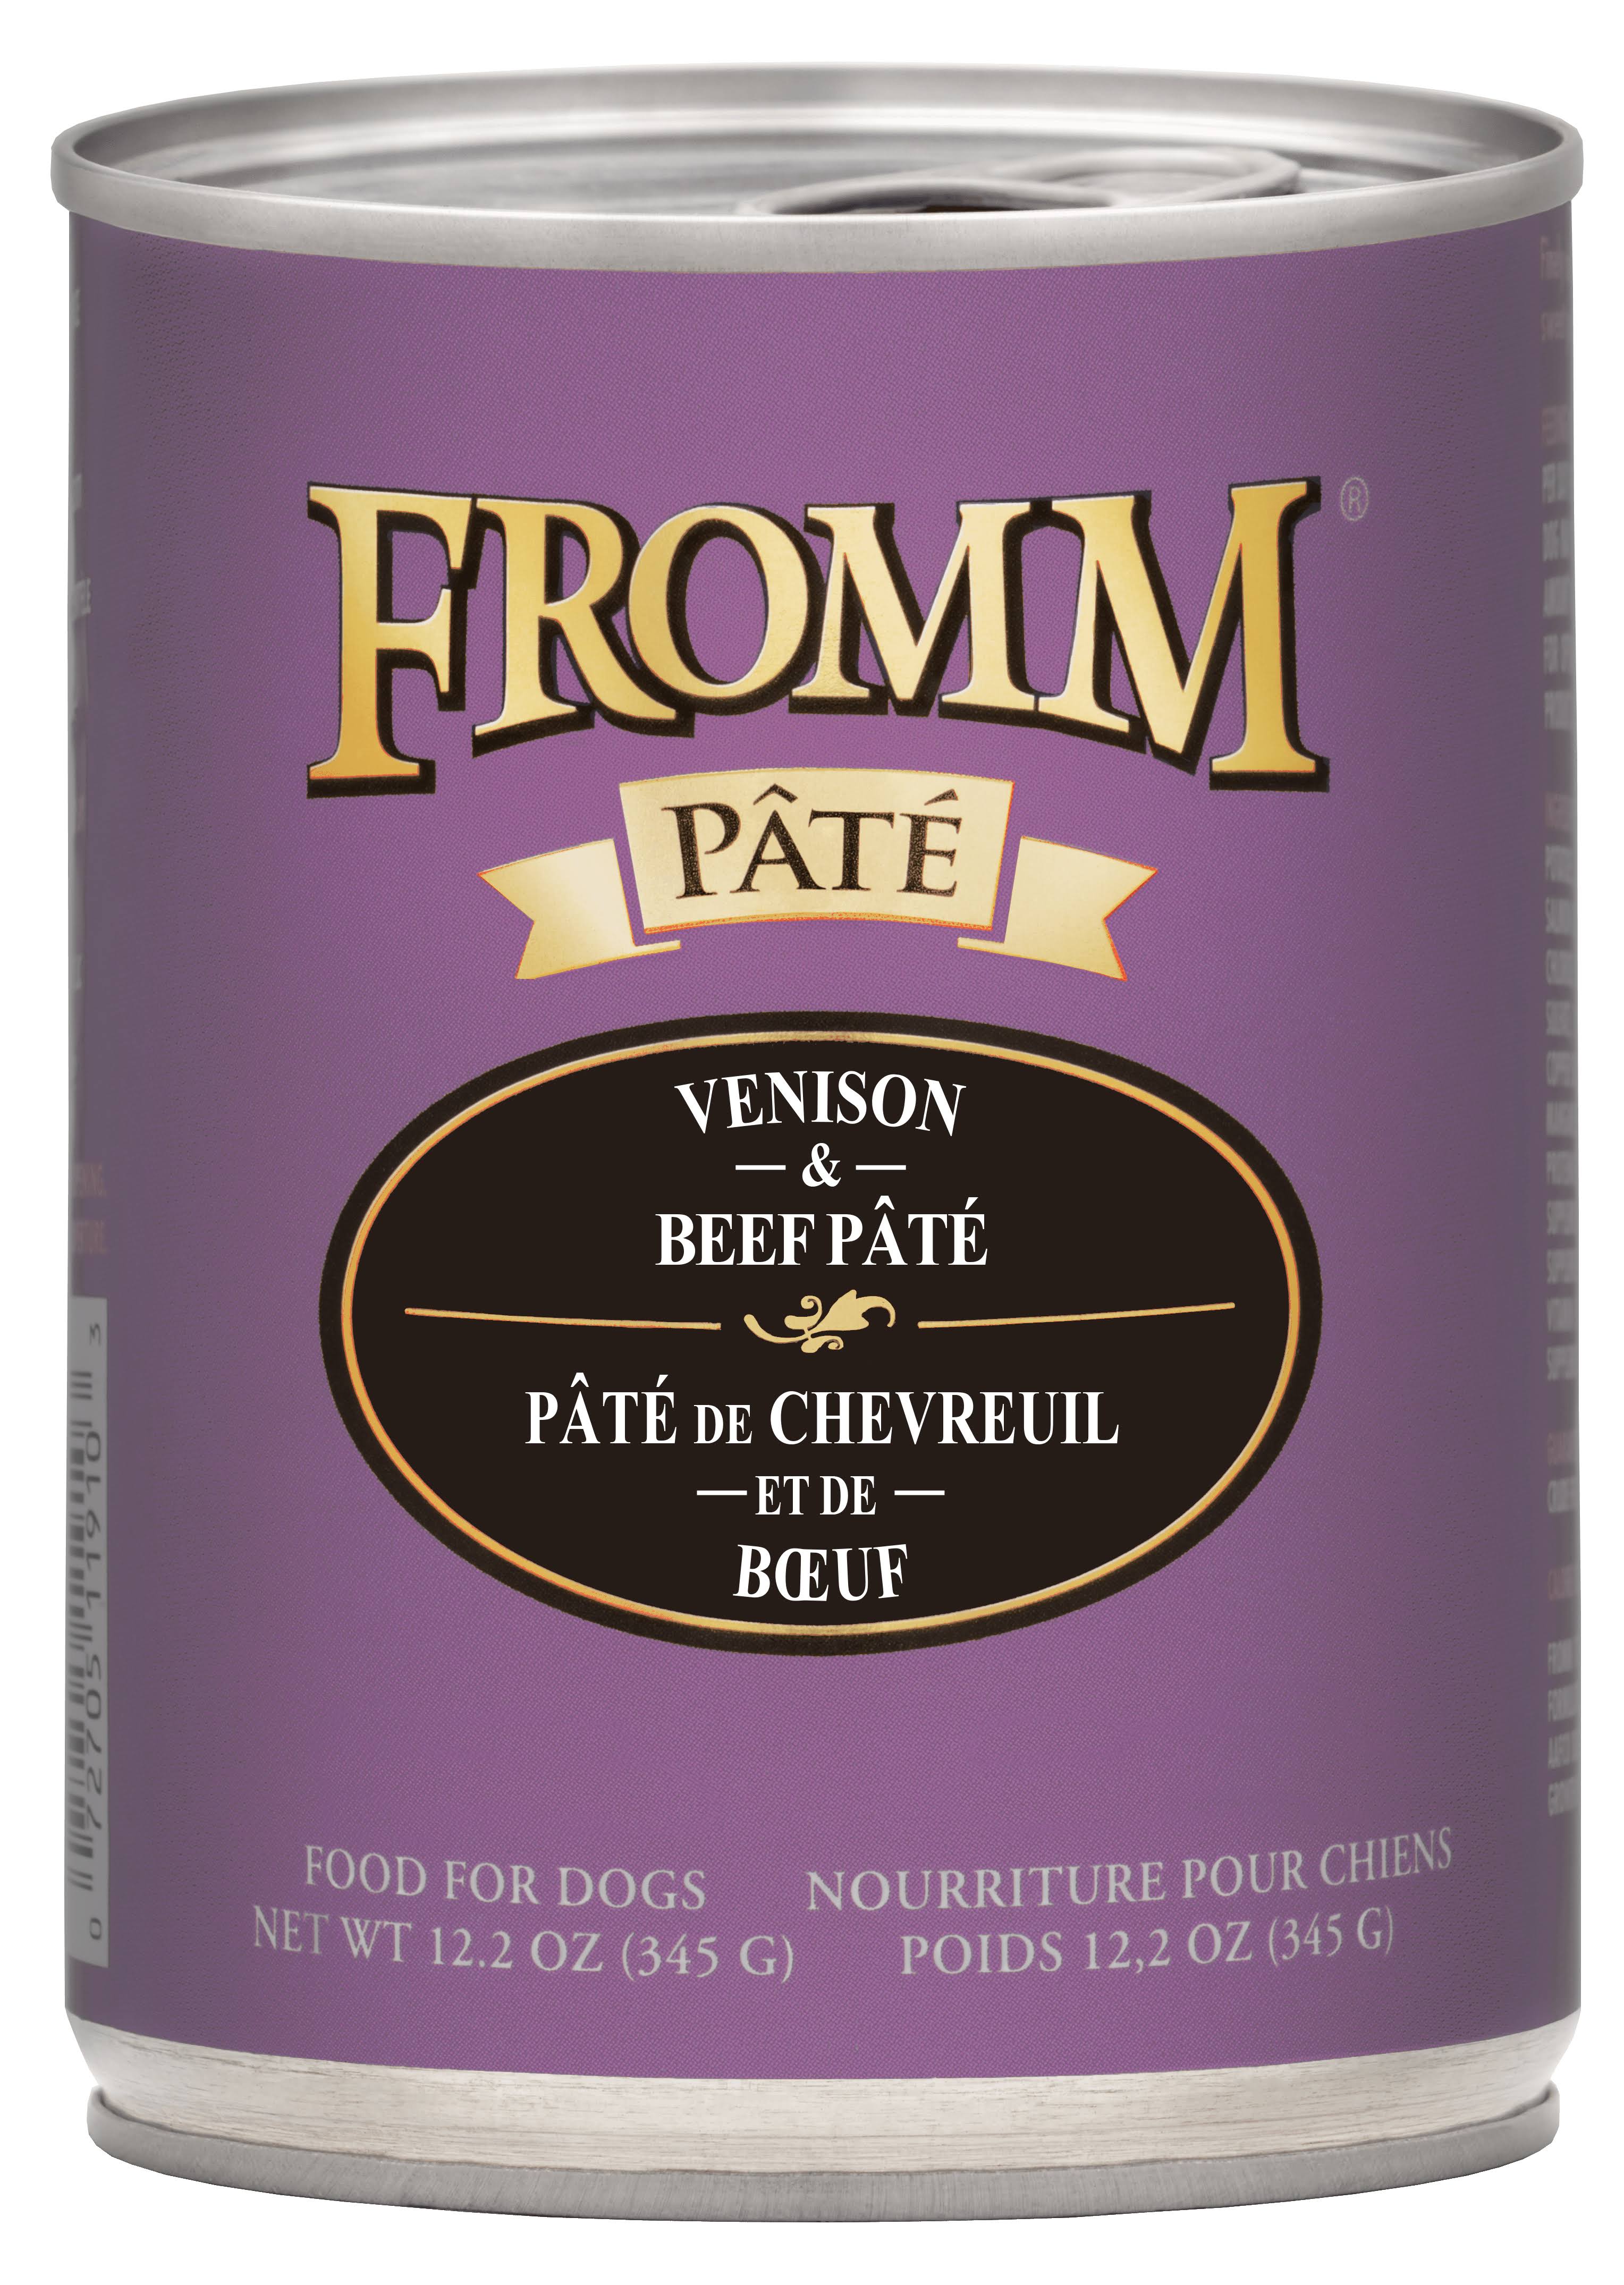 Fromm Family Gold Adult Dog Wet Food - Gold Venison & Beef Pate, 345g